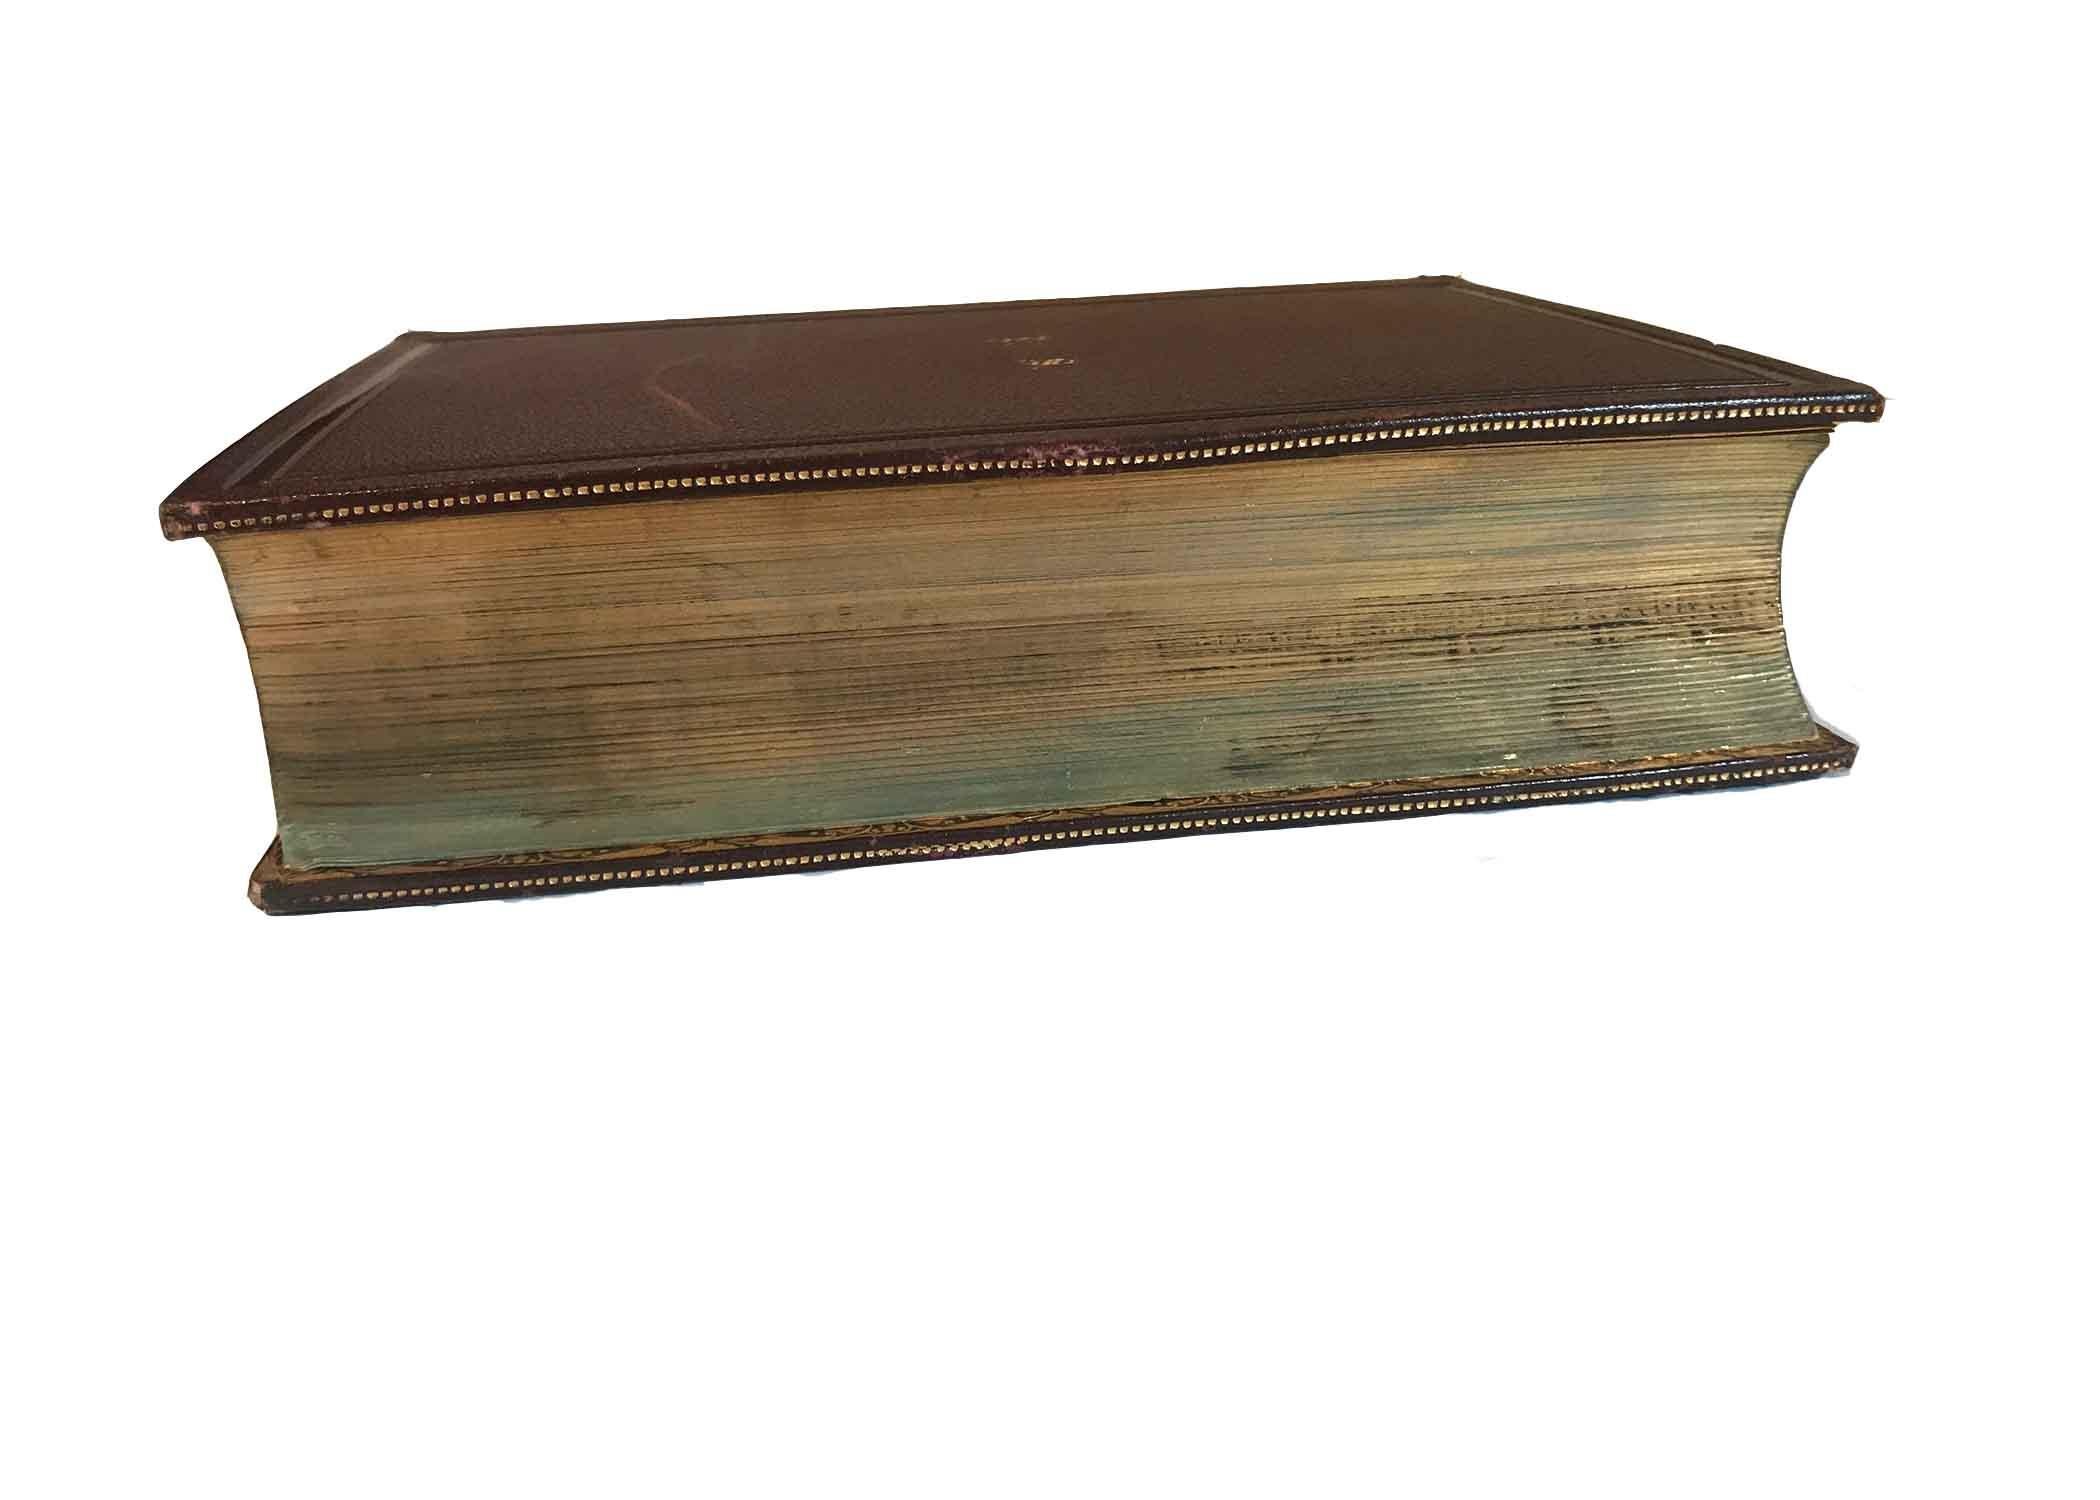 Antique fore-edge leather book of the poetical work's of Thomas Moore. Thomas Moore (1779-1852) was often referred to as 